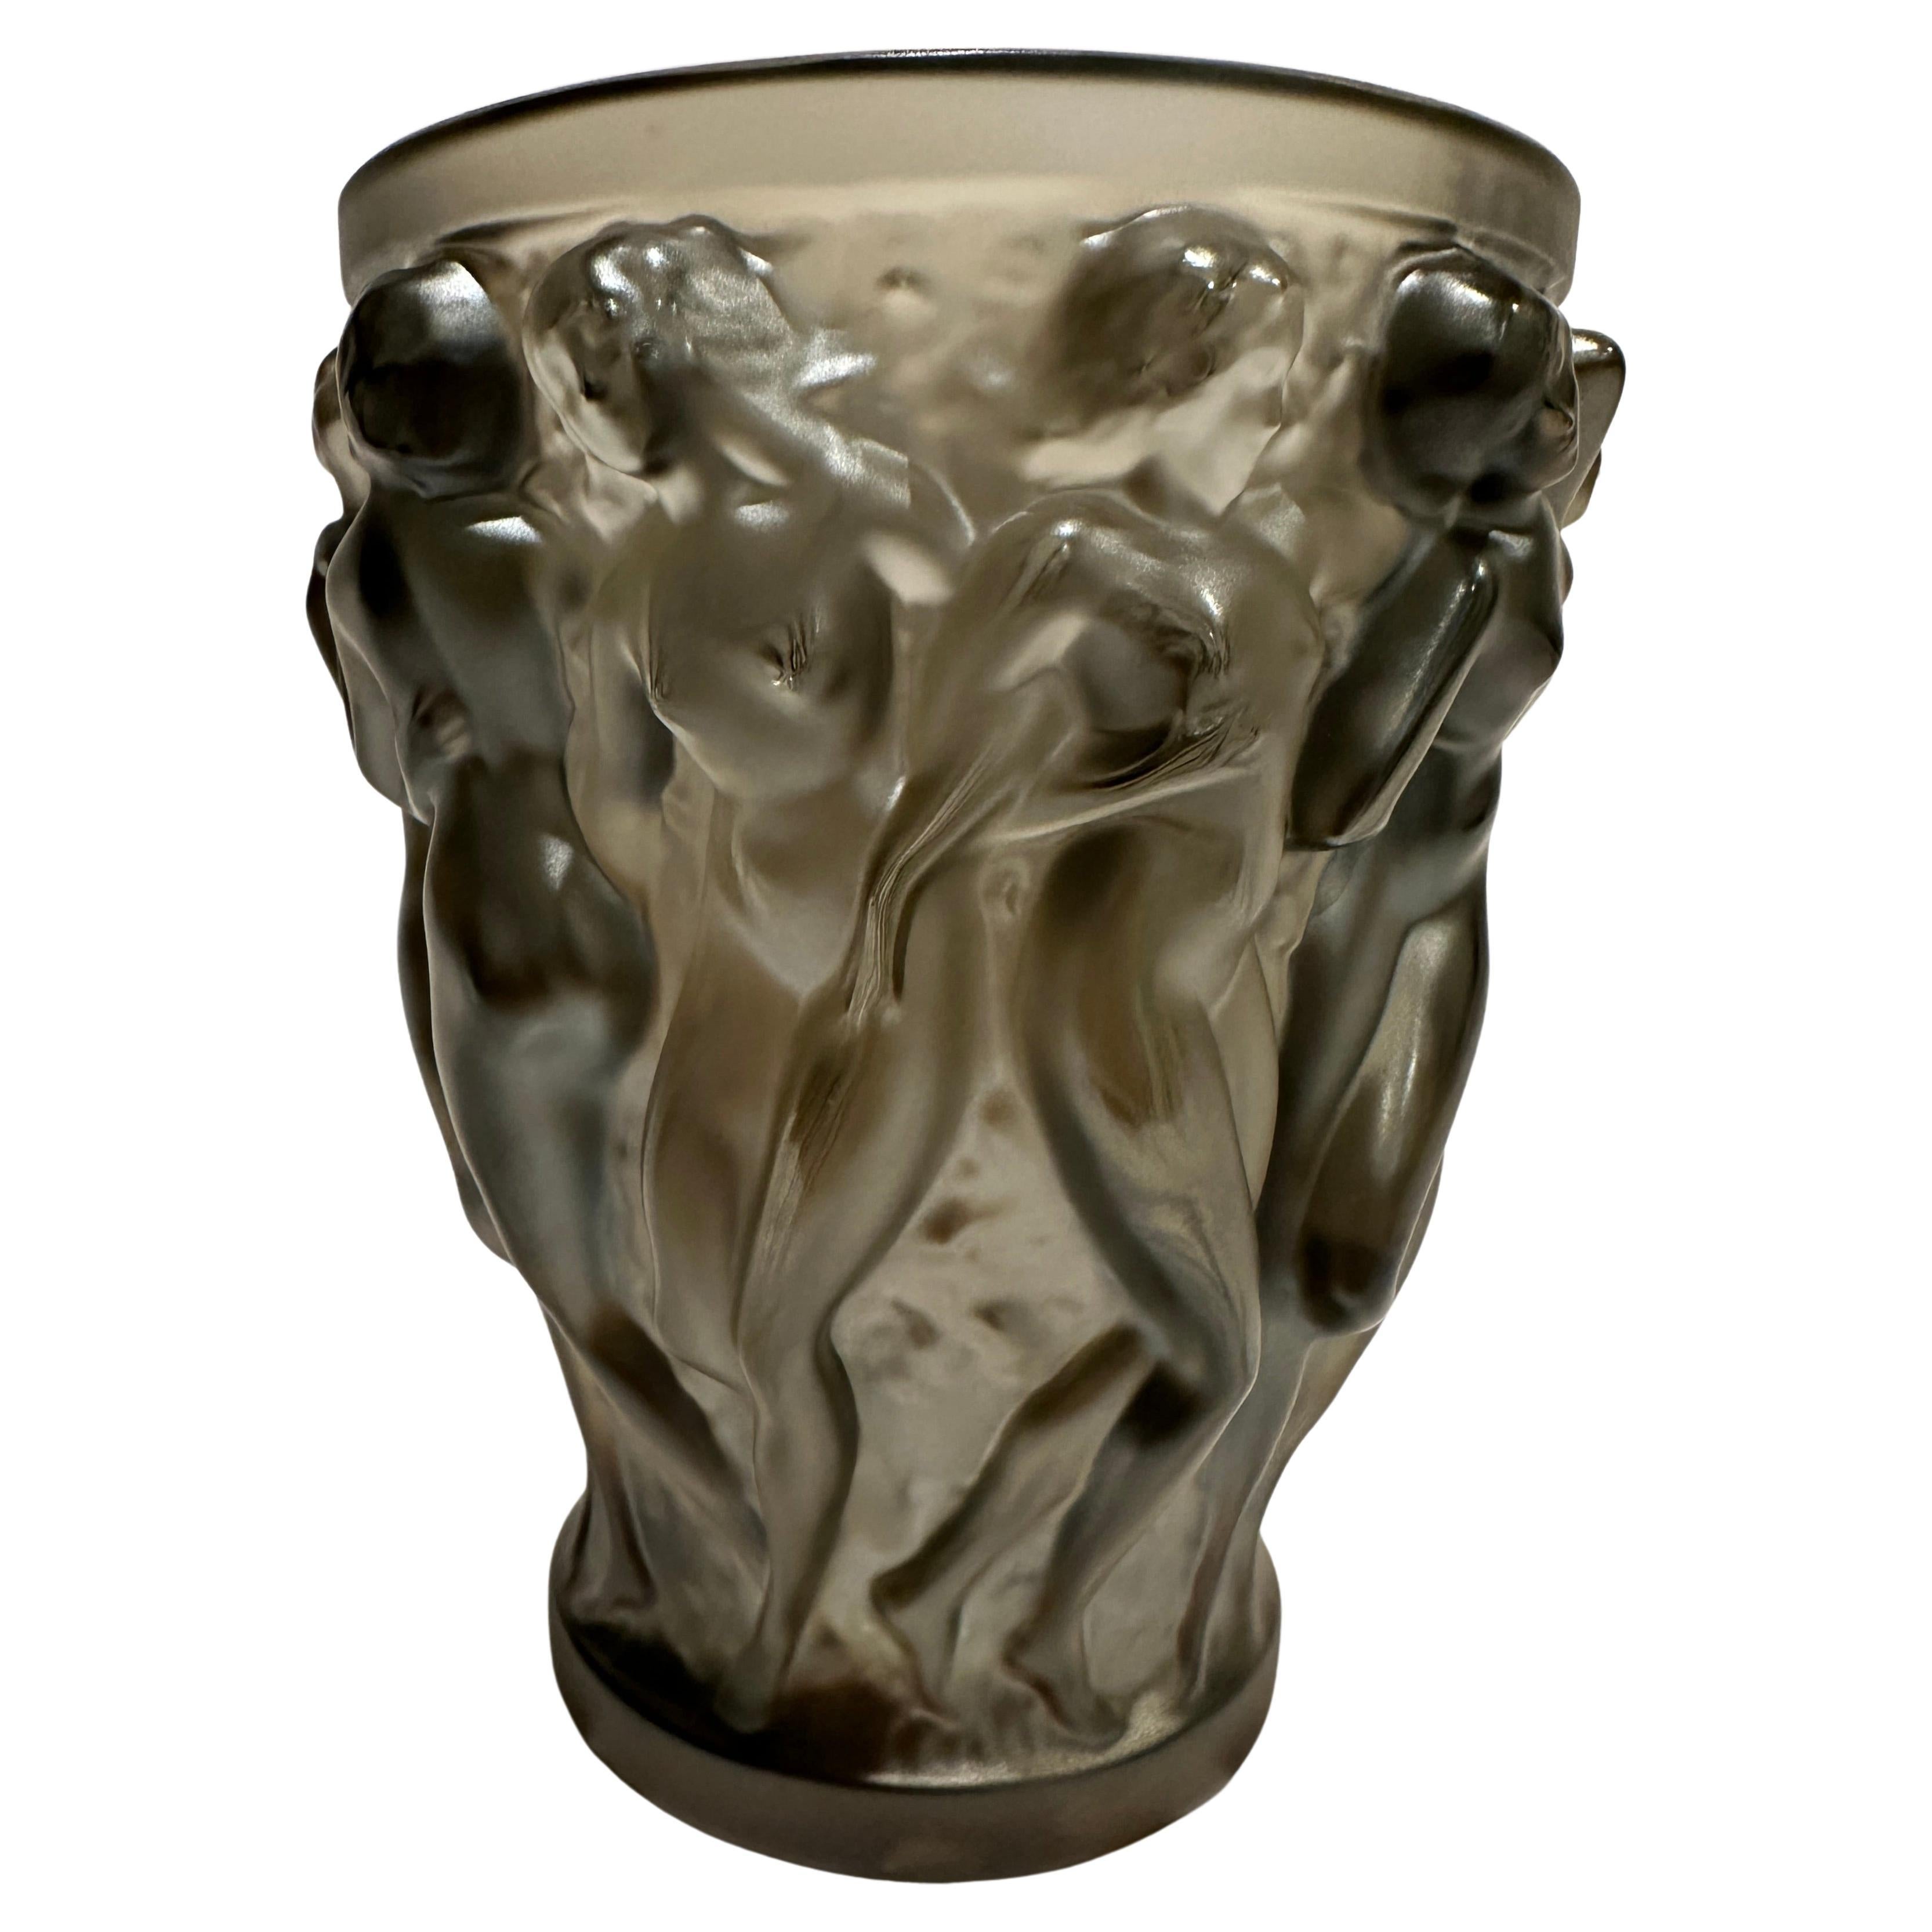 Does Lalique increase in value?